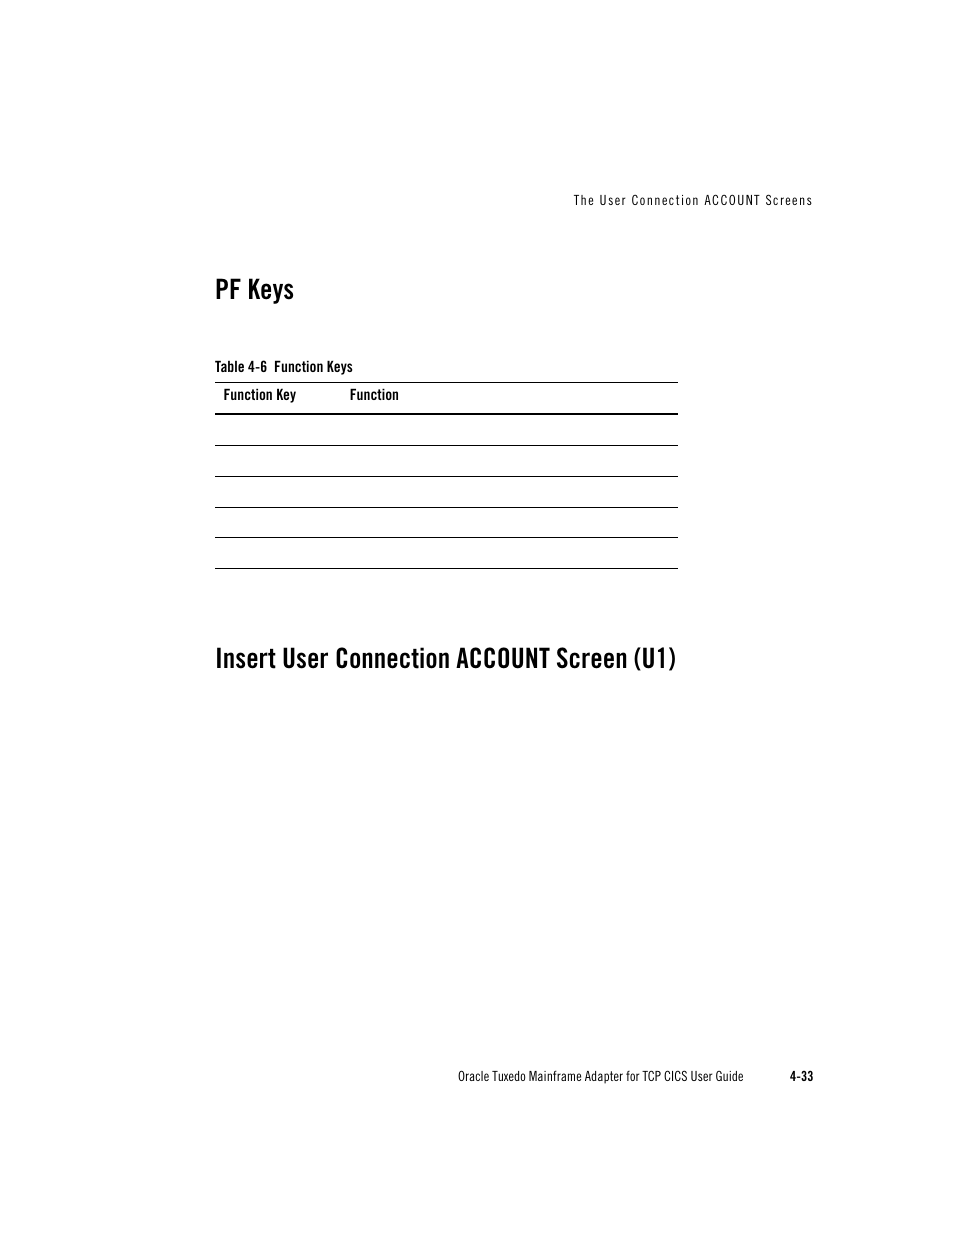 Pf keys, Insert user connection account screen (u1) | Oracle Audio Technologies Oracle Tuxedo User Manual | Page 67 / 112